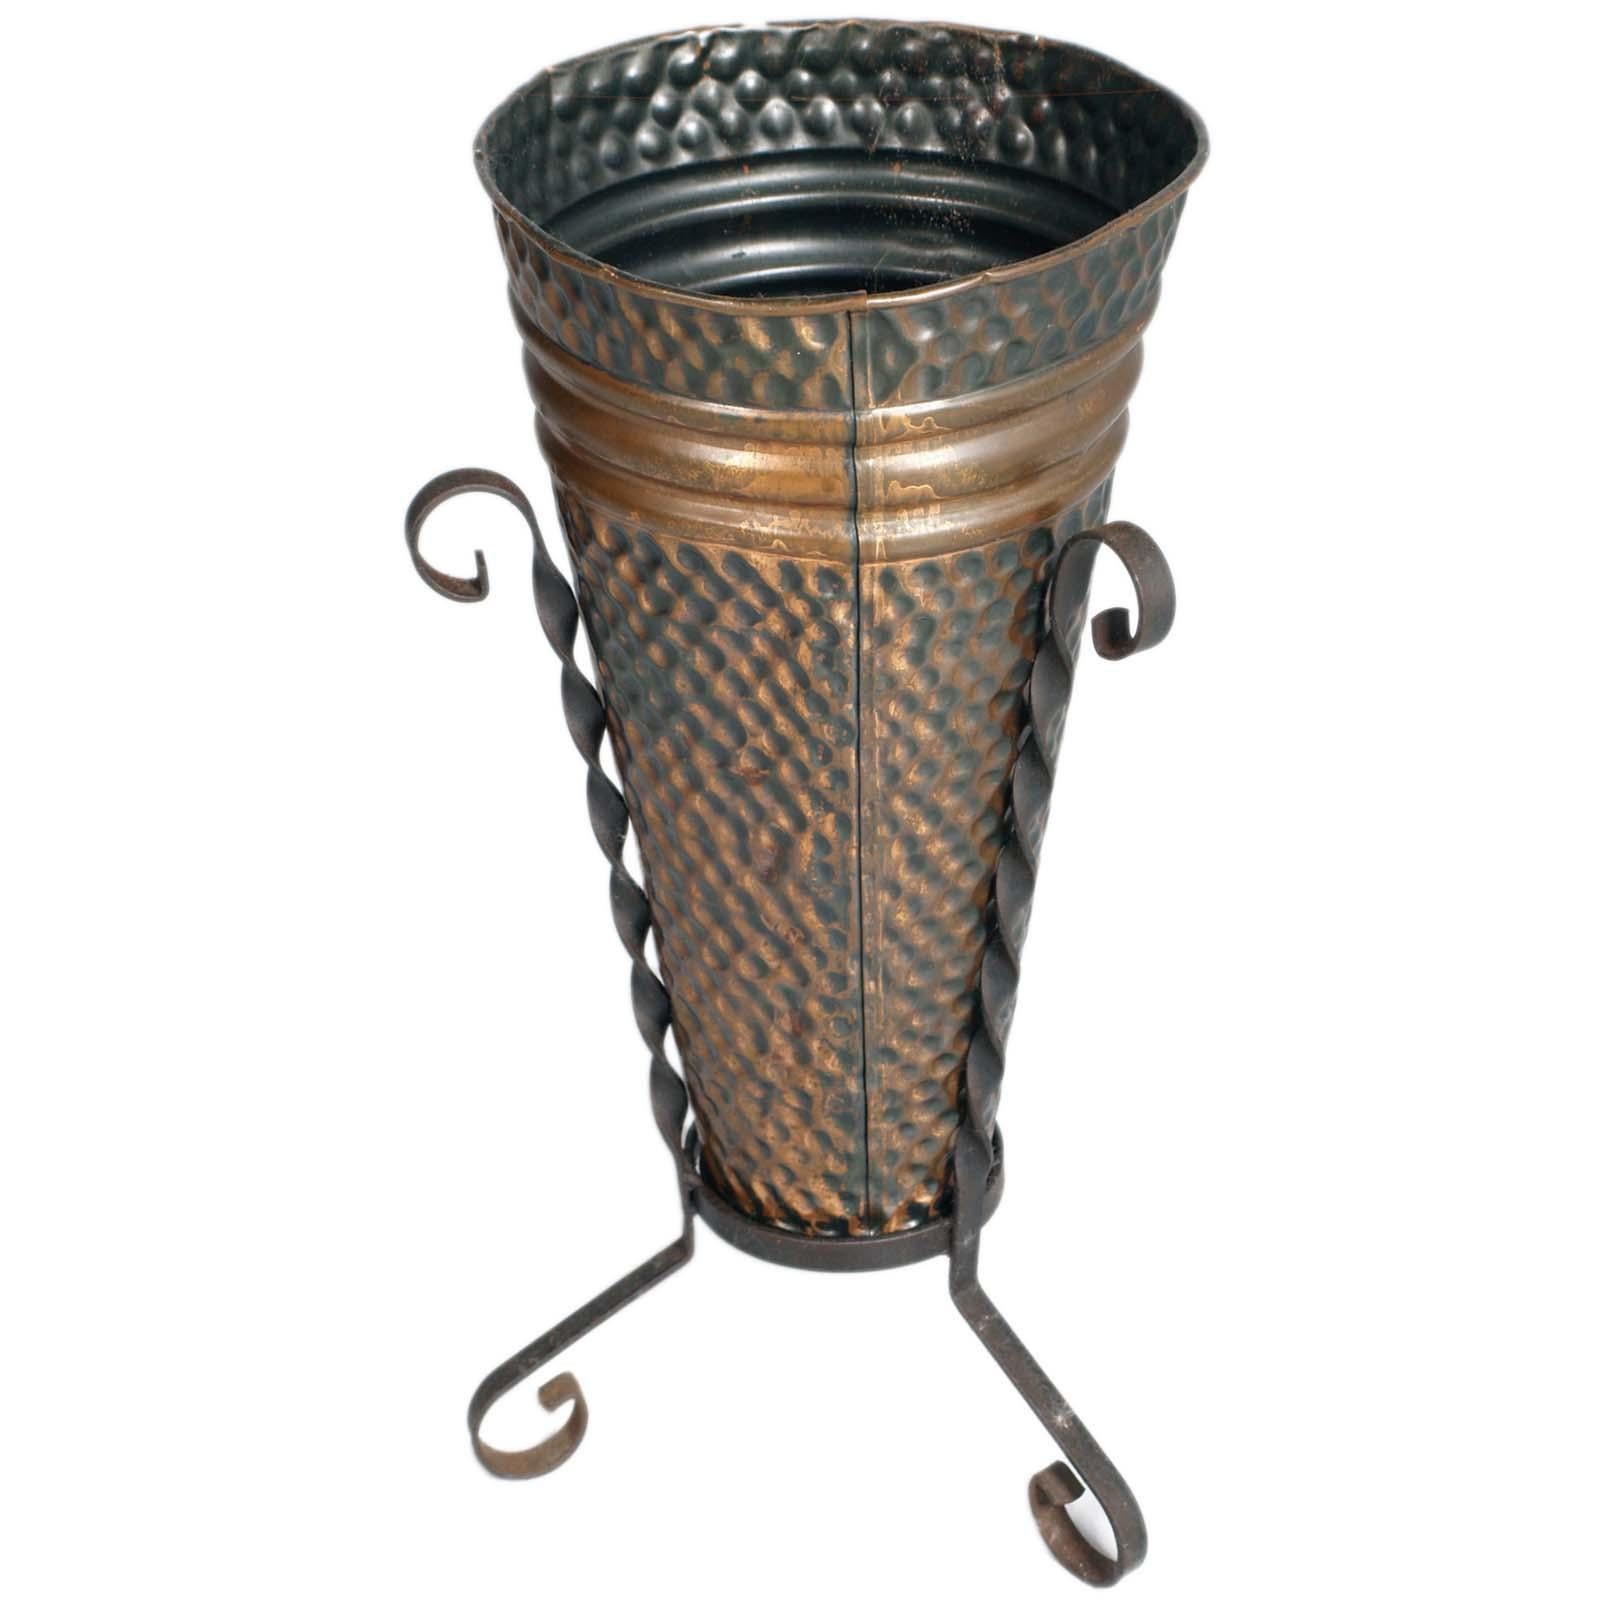 Umbrella stand from the 1940s in handmade embossed burnished copper with detailed surface sustained by a Forged Wrought Iron Structure belonging to the Italian region Trentino, well known for copper manufacturing.
Diameter: base: 25cm, stand: 23cm.